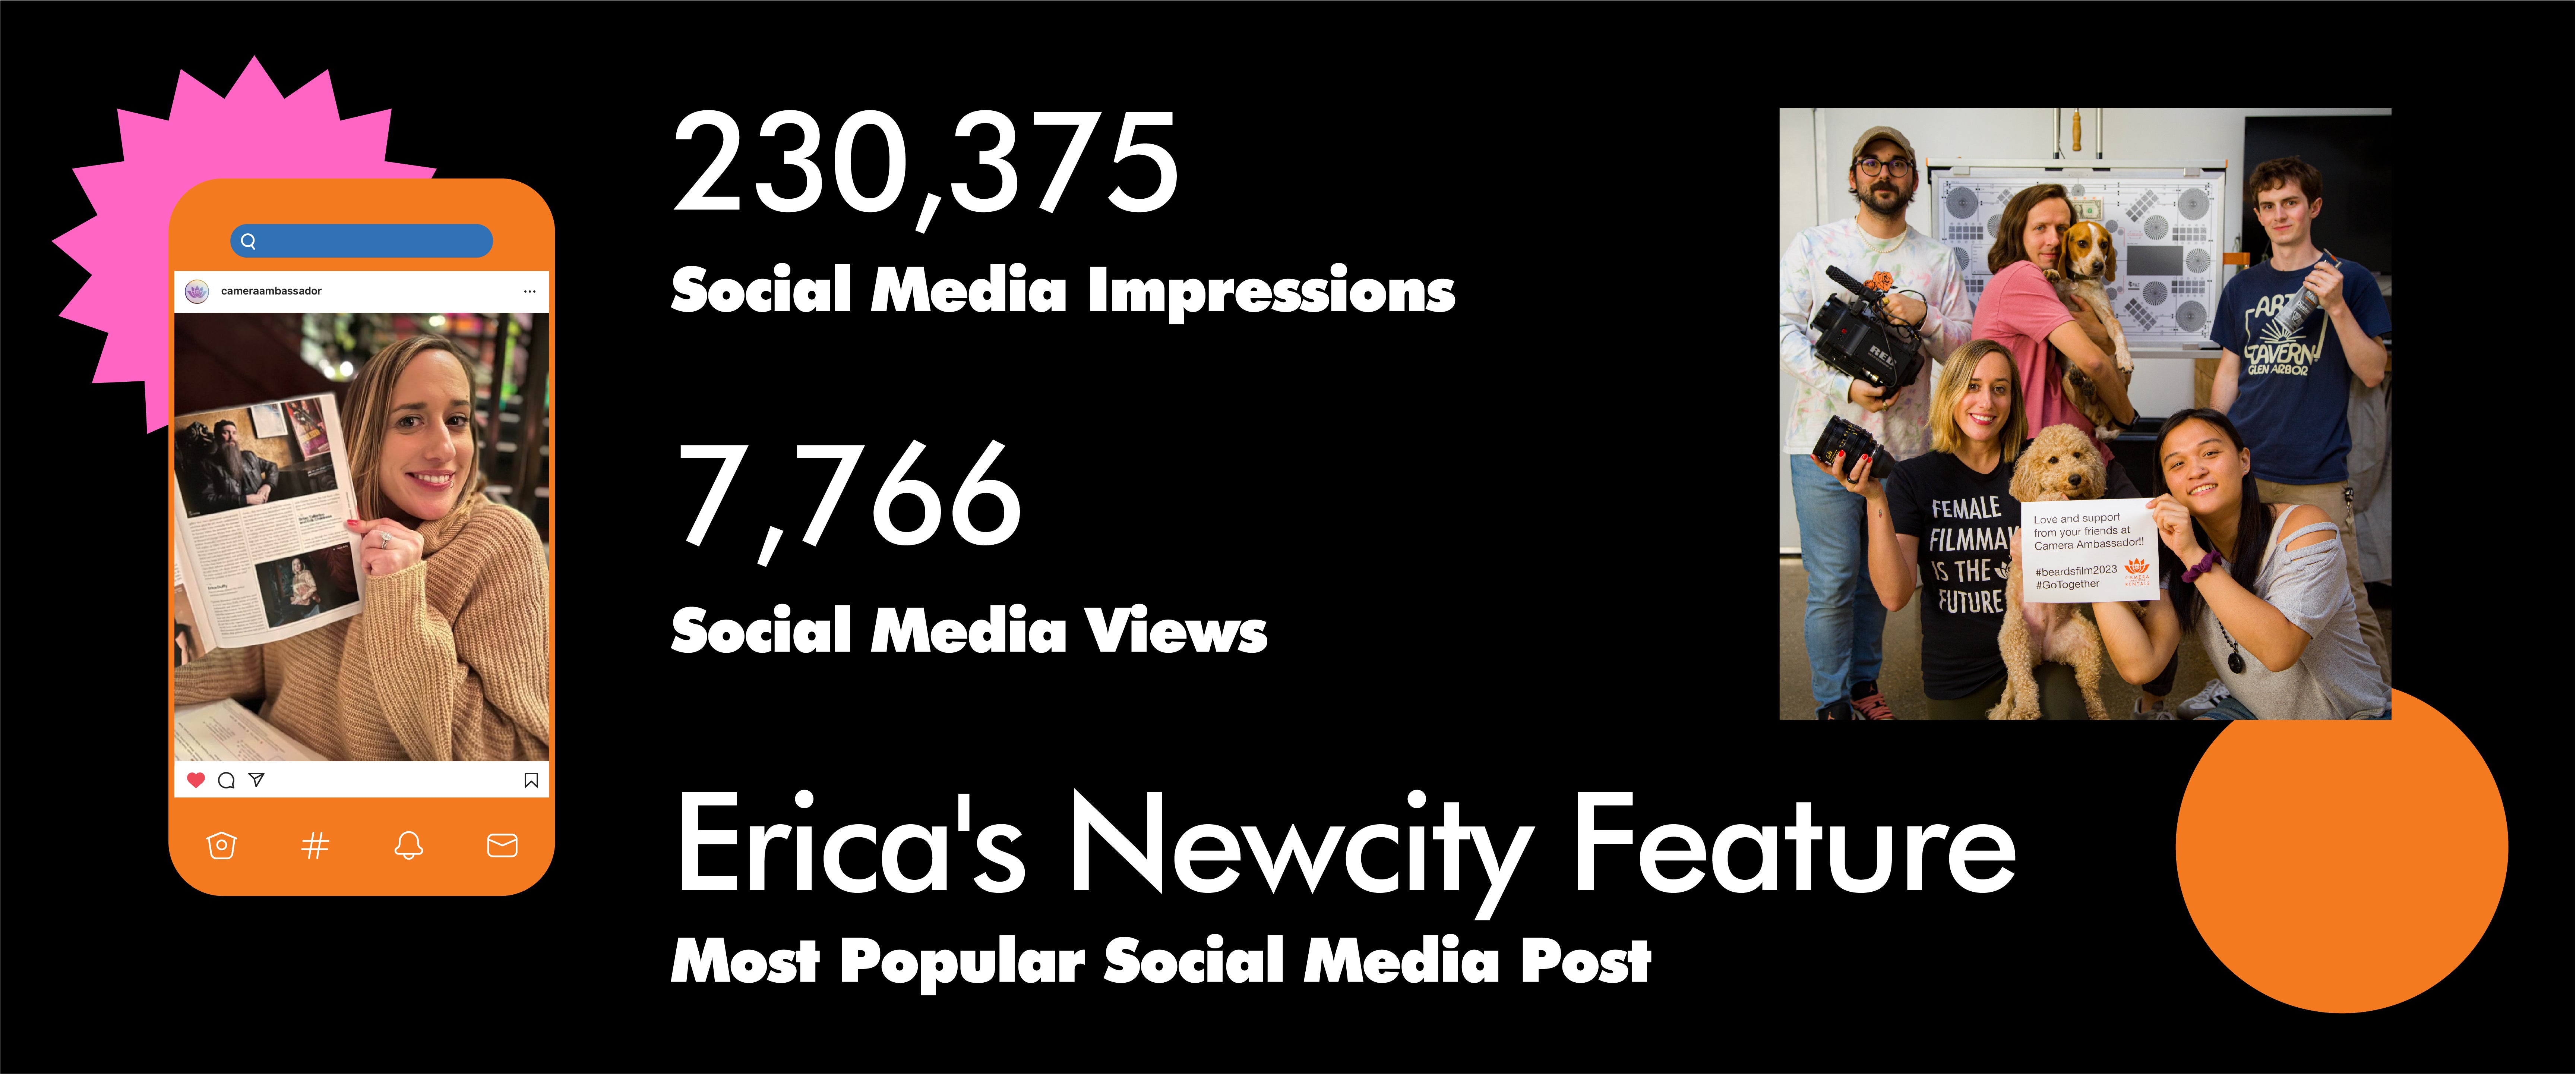 The stats mention 230375 Social Media Impressions, 7766 Social Media Views, and the Most Popular Social Media Post as Erica's Newcity Feature. On the left is a widget phone with the post of Erica holding up her Newcity article, and the right has an image of the Cam Fam posing with various objects in their hands in front of the prep bay.